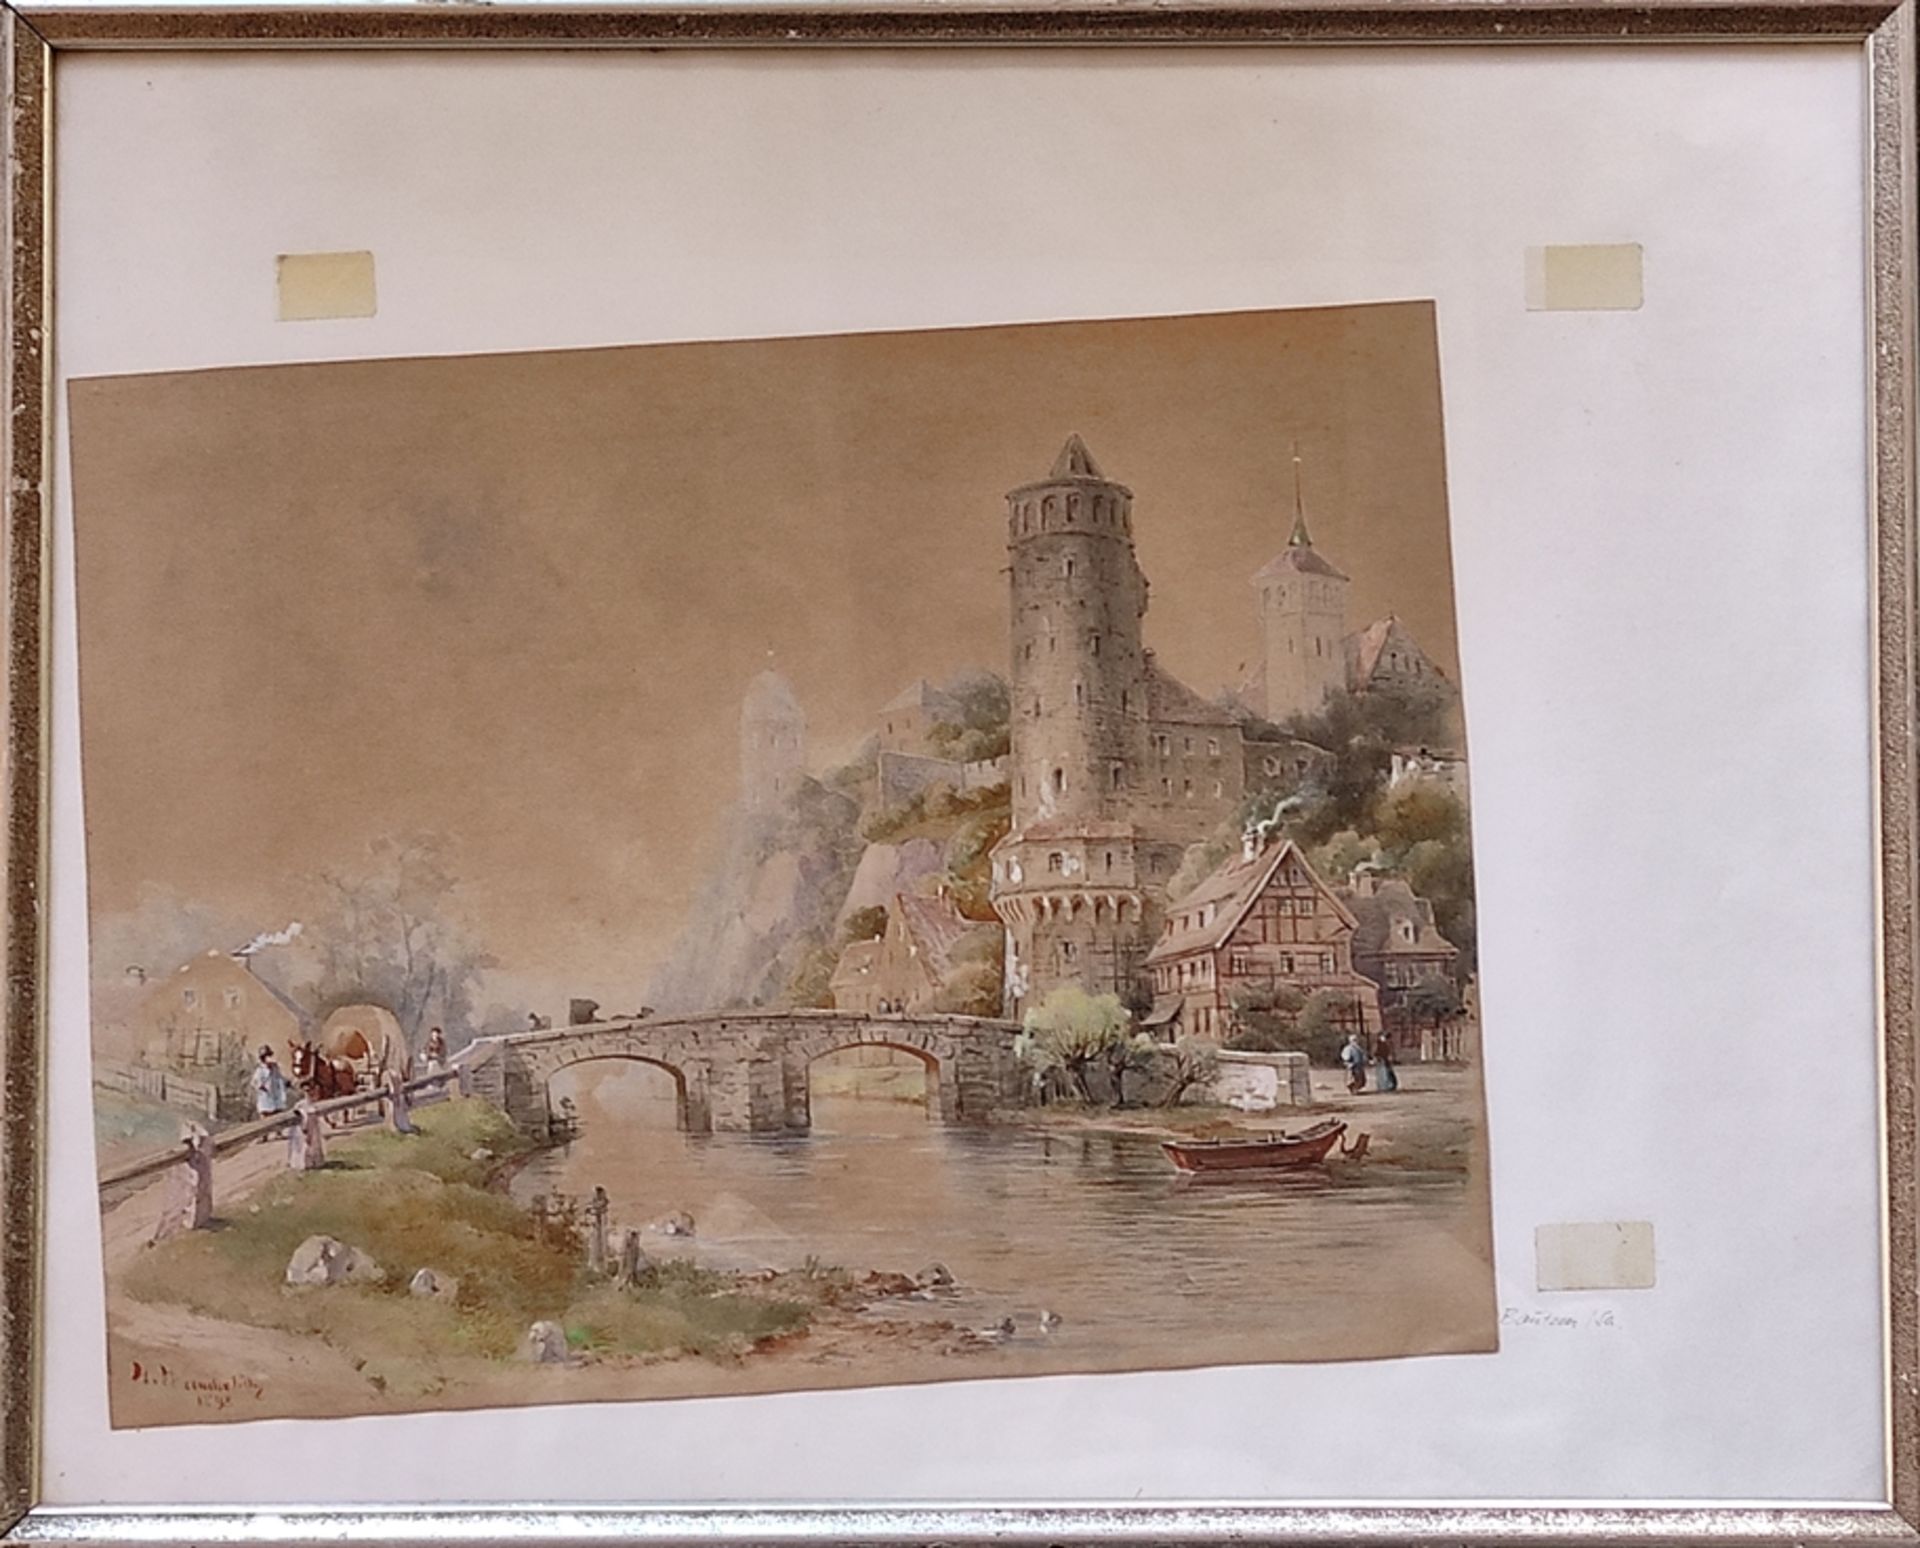 Watercolorist (19th century) "Bautzen", view of the castle and bridge, watercolor on paper, signed  - Image 2 of 5